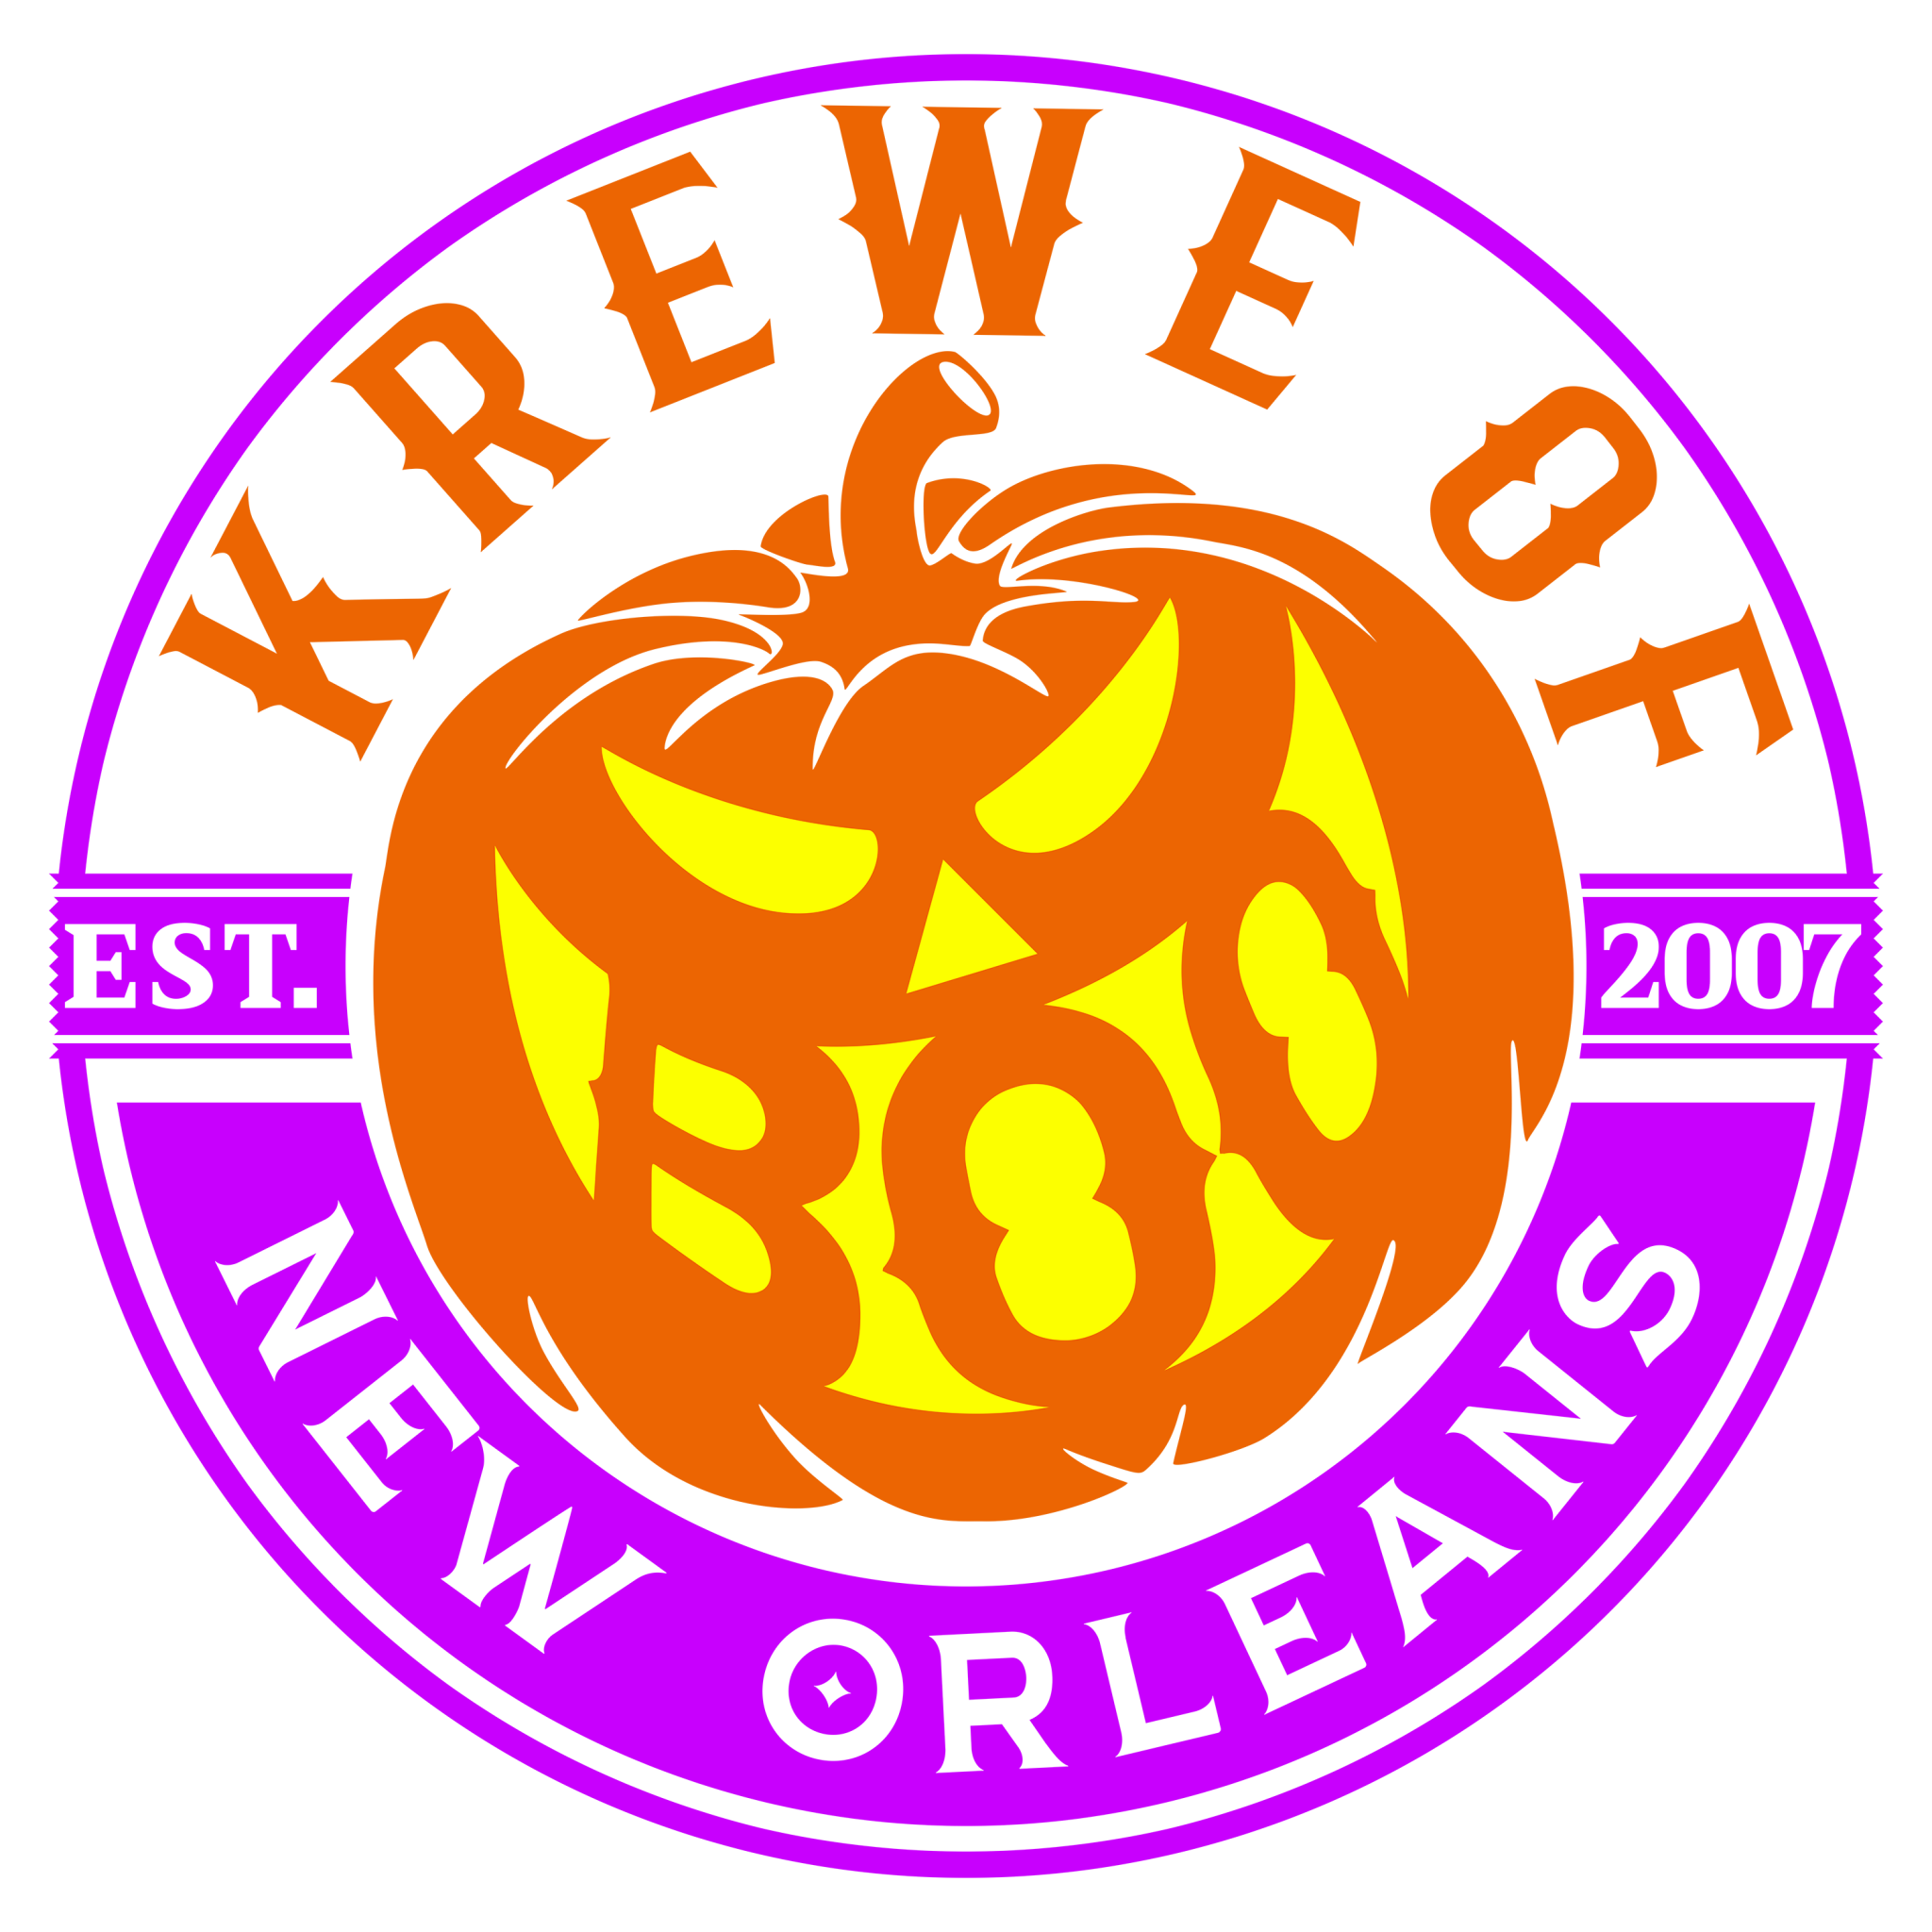 Krewe of BOO! Halloween Parade New Orleans Local News and Events